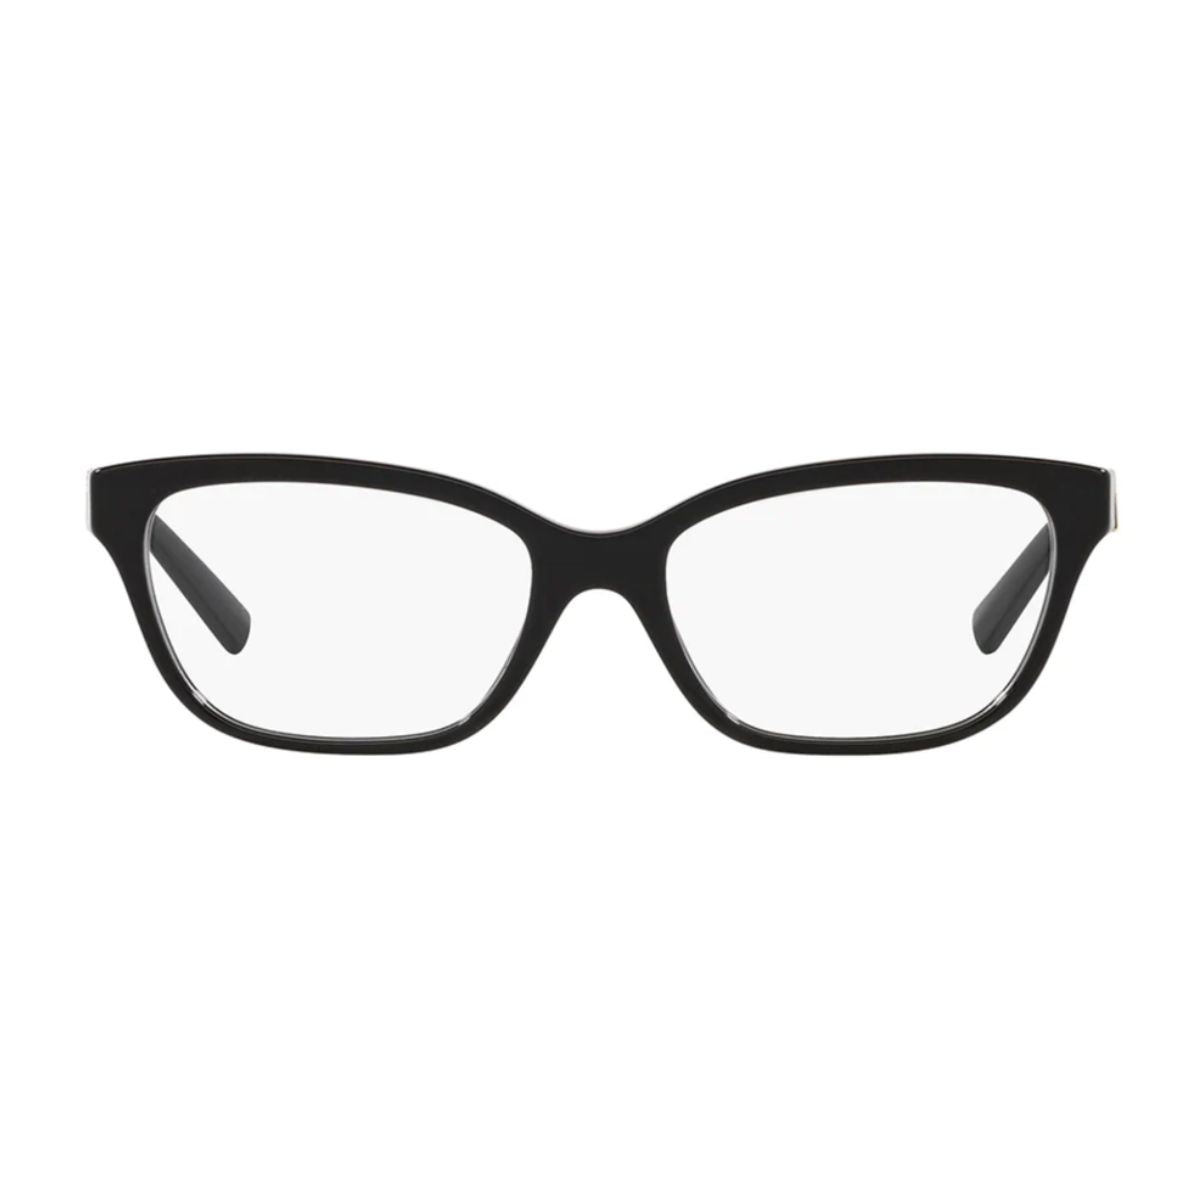 "Tiffany And Co 2233-B 8001 cateye glasses frame for women's at optorium"